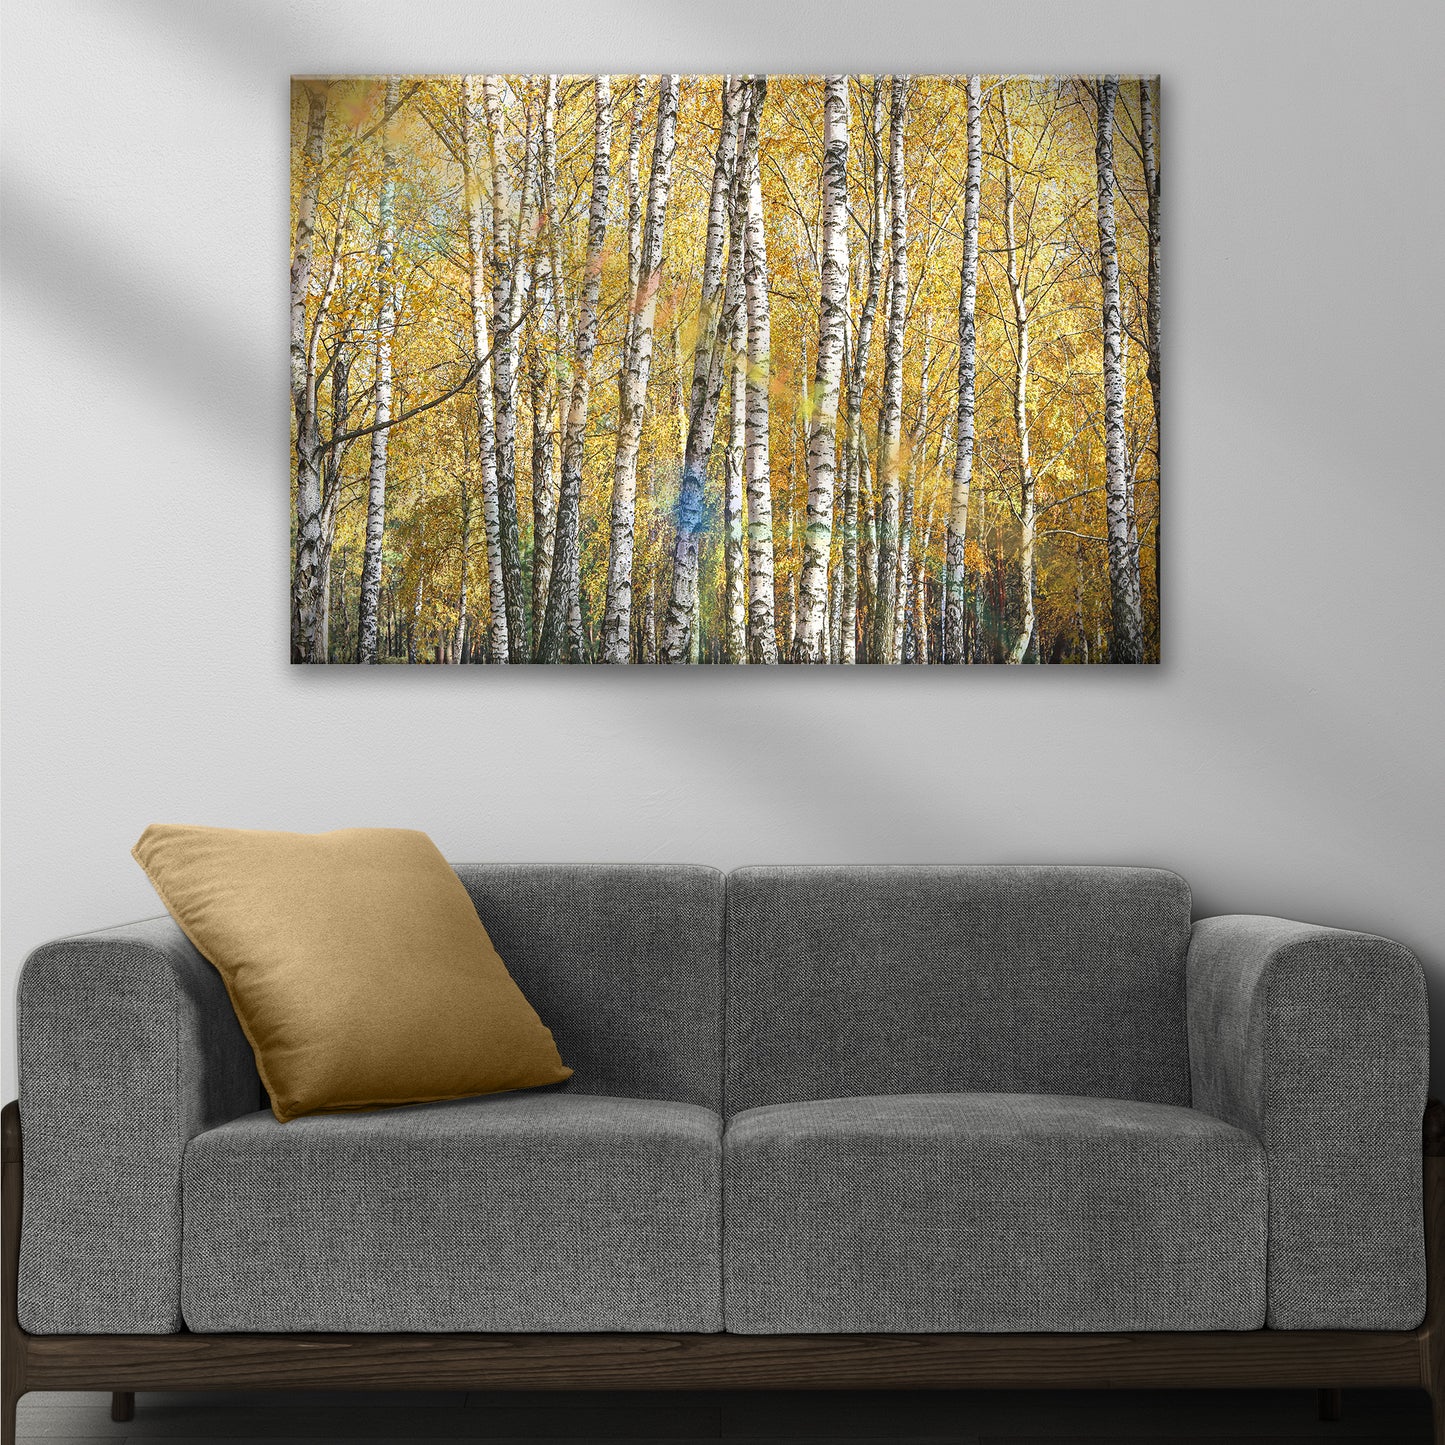 White Birch Trees With Golden Leaves Canvas Wall Art Style 2 - Image by Tailored Canvases